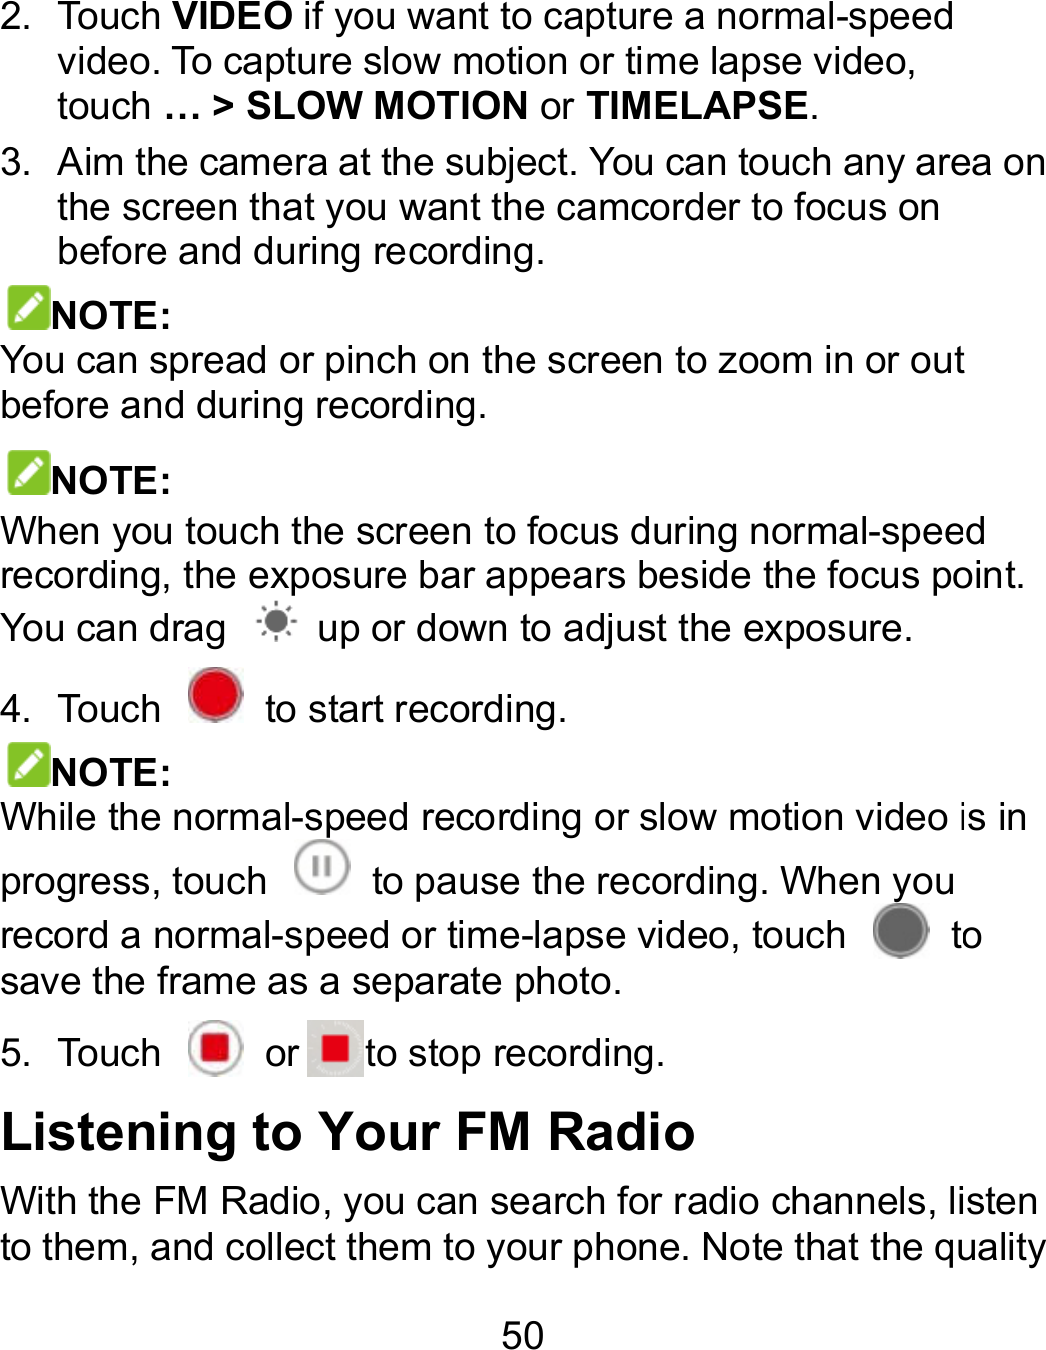 50 2.  Touch VIDEO if you want to capture a normal-speed video. To capture slow motion or time lapse video, touch … &gt; SLOW MOTION or TIMELAPSE. 3.  Aim the camera at the subject. You can touch any area on the screen that you want the camcorder to focus on before and during recording. NOTE: You can spread or pinch on the screen to zoom in or out before and during recording. NOTE: When you touch the screen to focus during normal-speed recording, the exposure bar appears beside the focus point. You can drag    up or down to adjust the exposure. 4.  Touch    to start recording. NOTE: While the normal-speed recording or slow motion video is in progress, touch   to pause the recording. When you record a normal-speed or time-lapse video, touch   to save the frame as a separate photo. 5.  Touch    or to stop recording. Listening to Your FM Radio With the FM Radio, you can search for radio channels, listen to them, and collect them to your phone. Note that the quality speed You can touch any area on You can spread or pinch on the screen to zoom in or out peed recording, the exposure bar appears beside the focus point. is in to pause the recording. When you to With the FM Radio, you can search for radio channels, listen ollect them to your phone. Note that the quality 